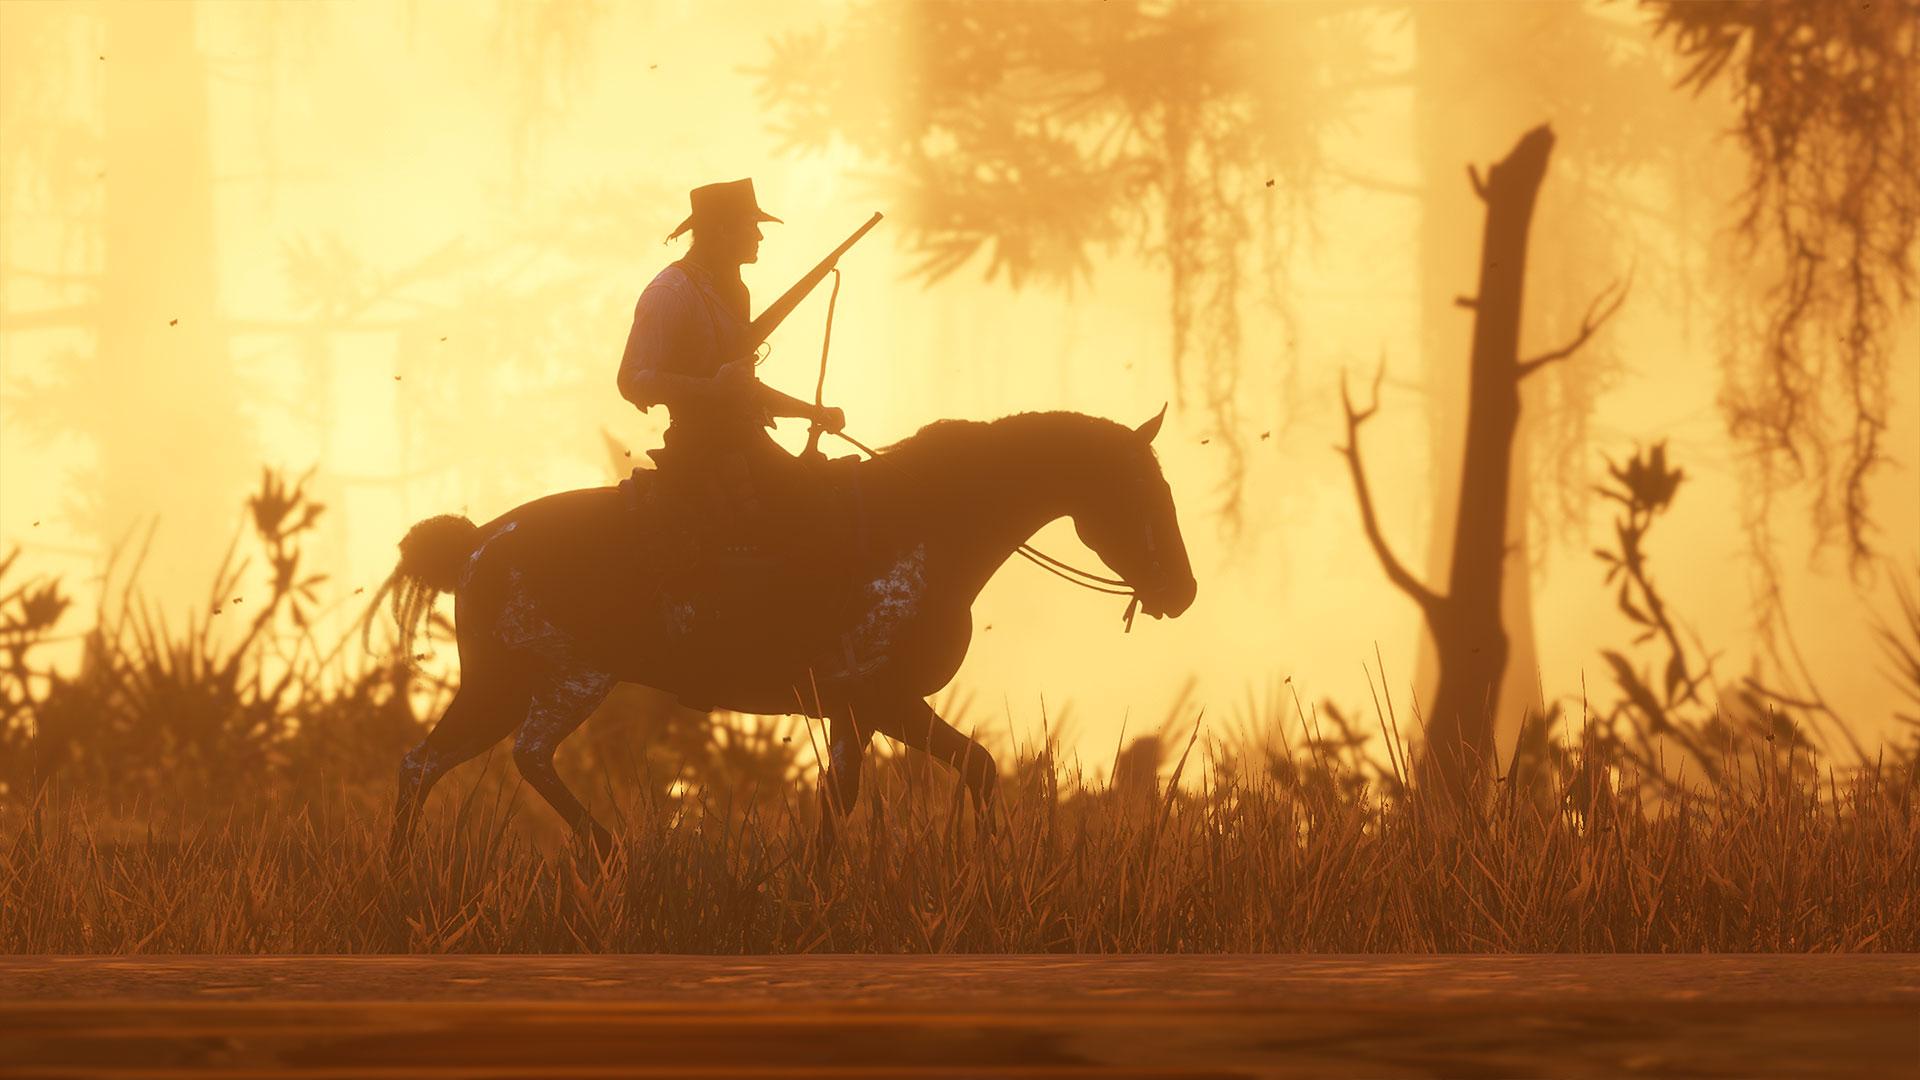 Red Dead Redemption 2 review: “When the credits roll, you'll have